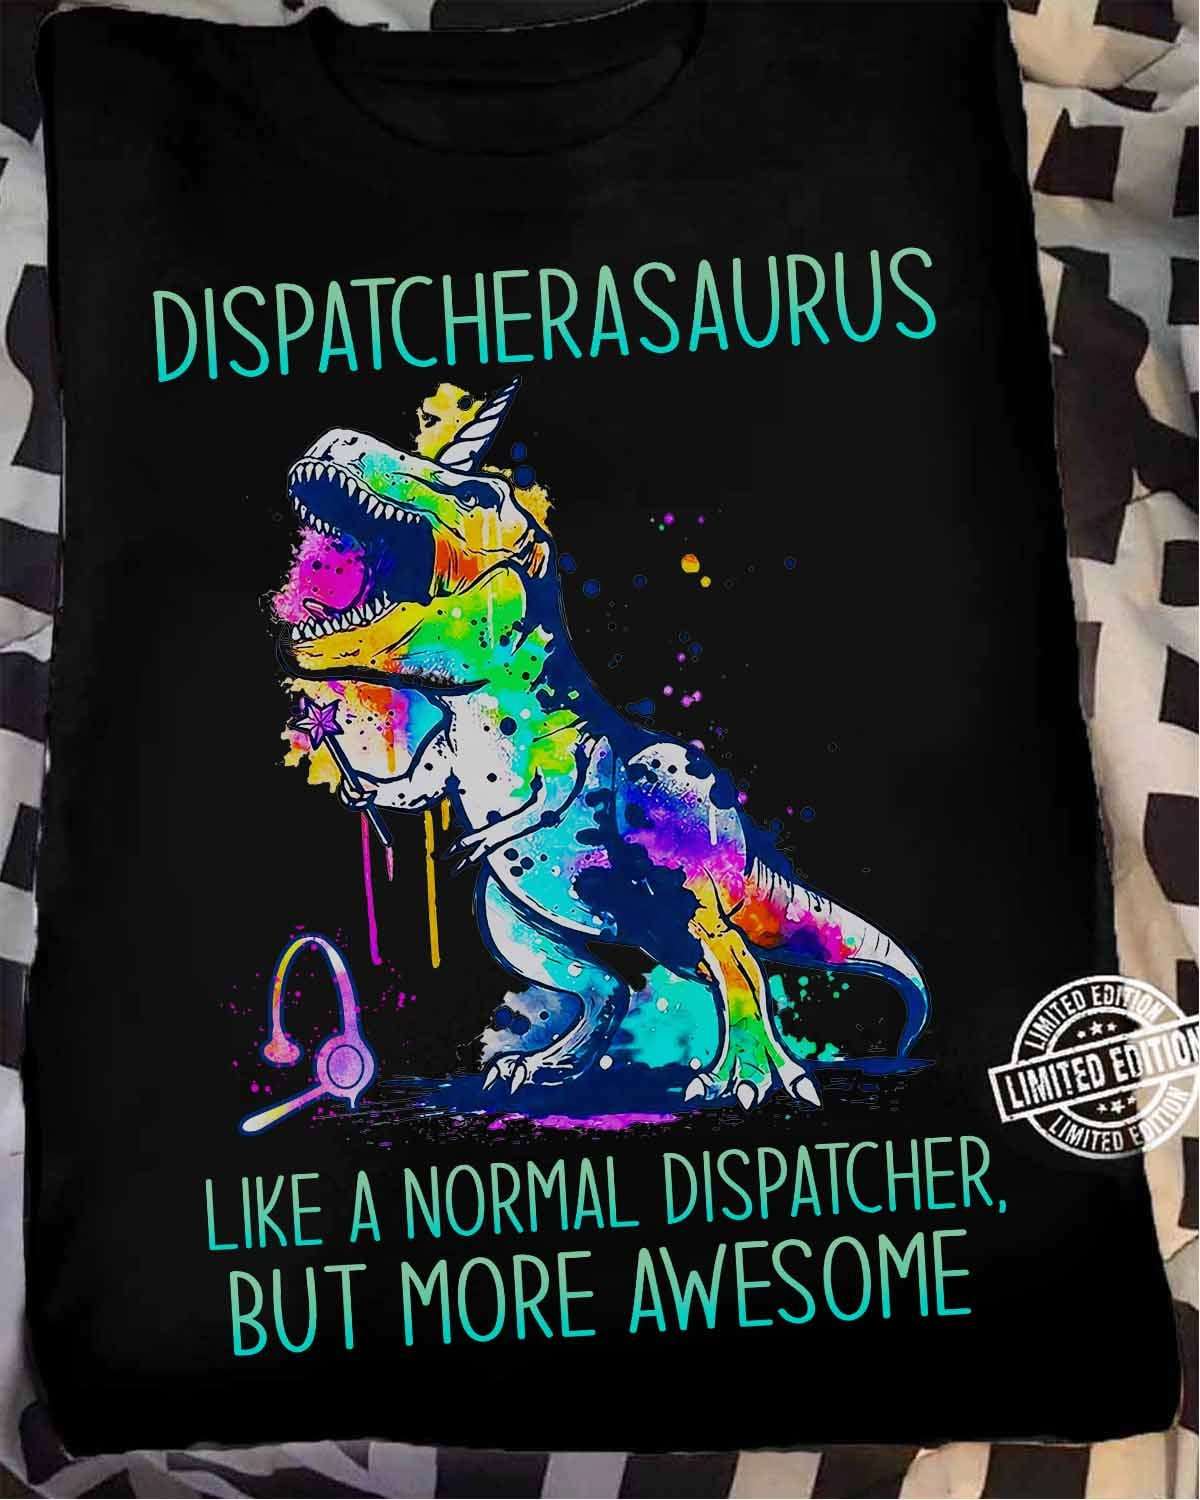 Dispatcherasaurus like a normal dispatcher, but more awesome - Awesome colorful dinosaur, dispatcher the job